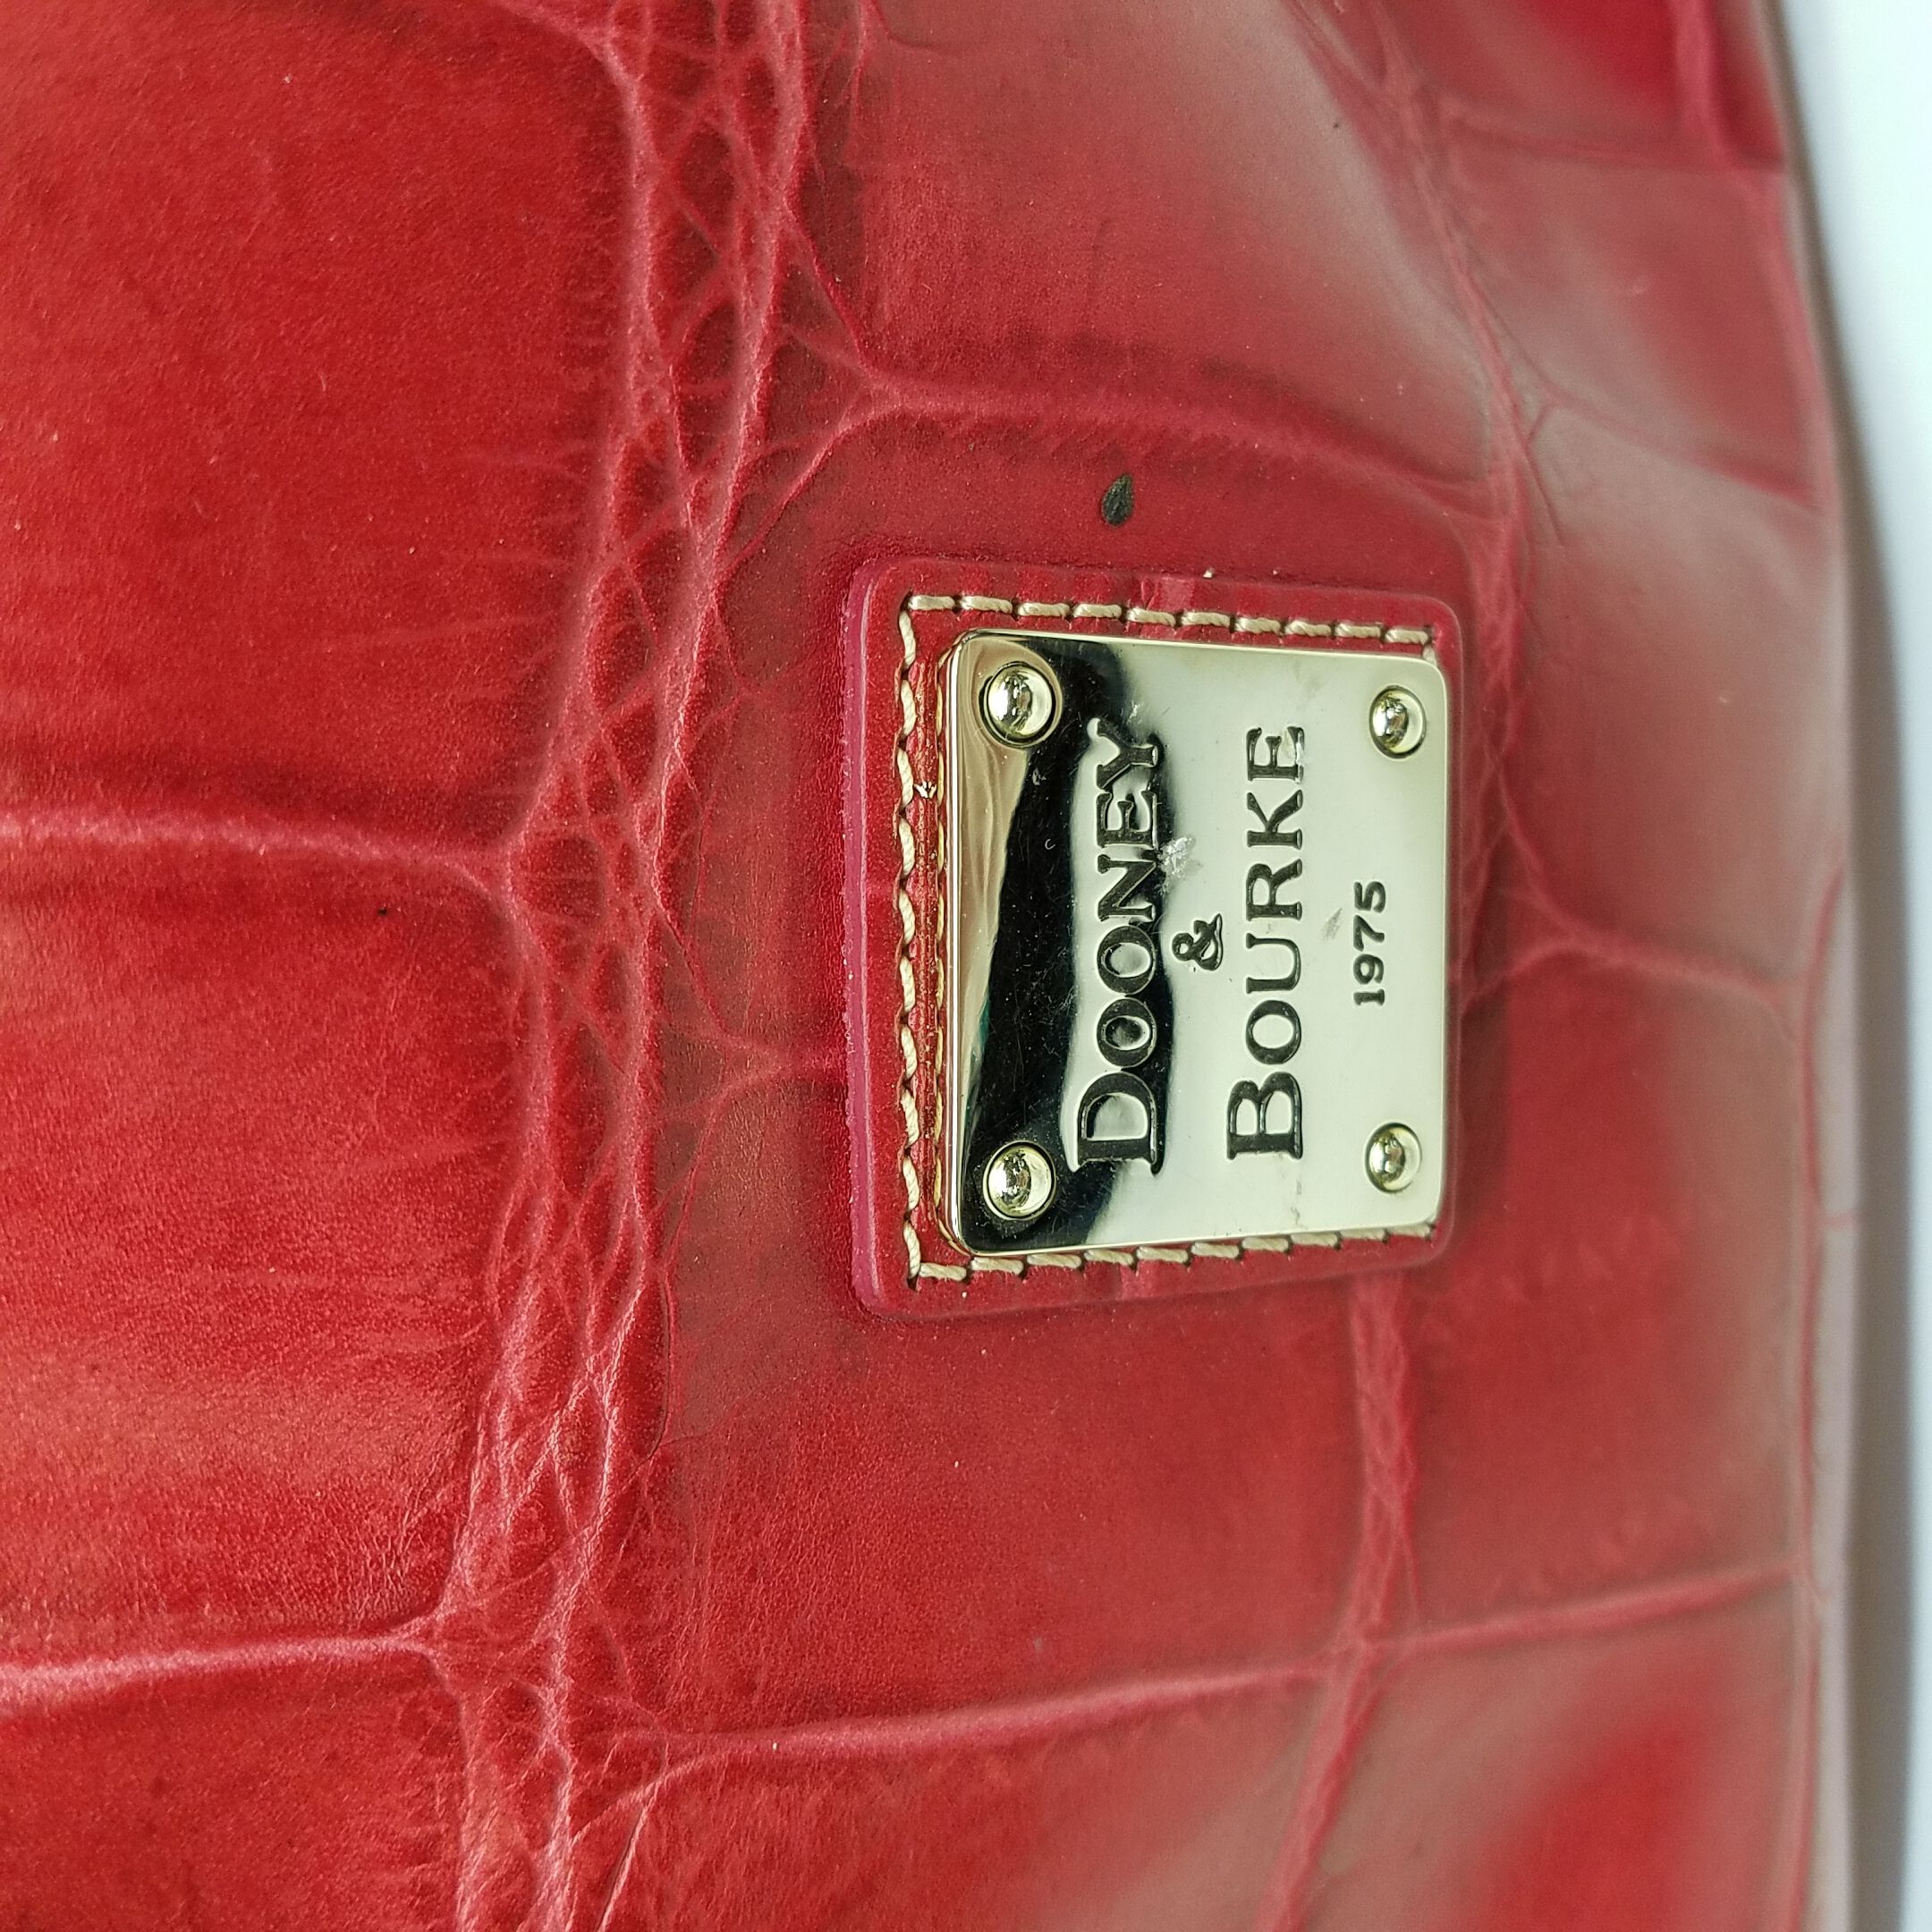 Red Patent Leather Dooney Bourke Purse Outlet - www.edoc.com.vn 1694894221